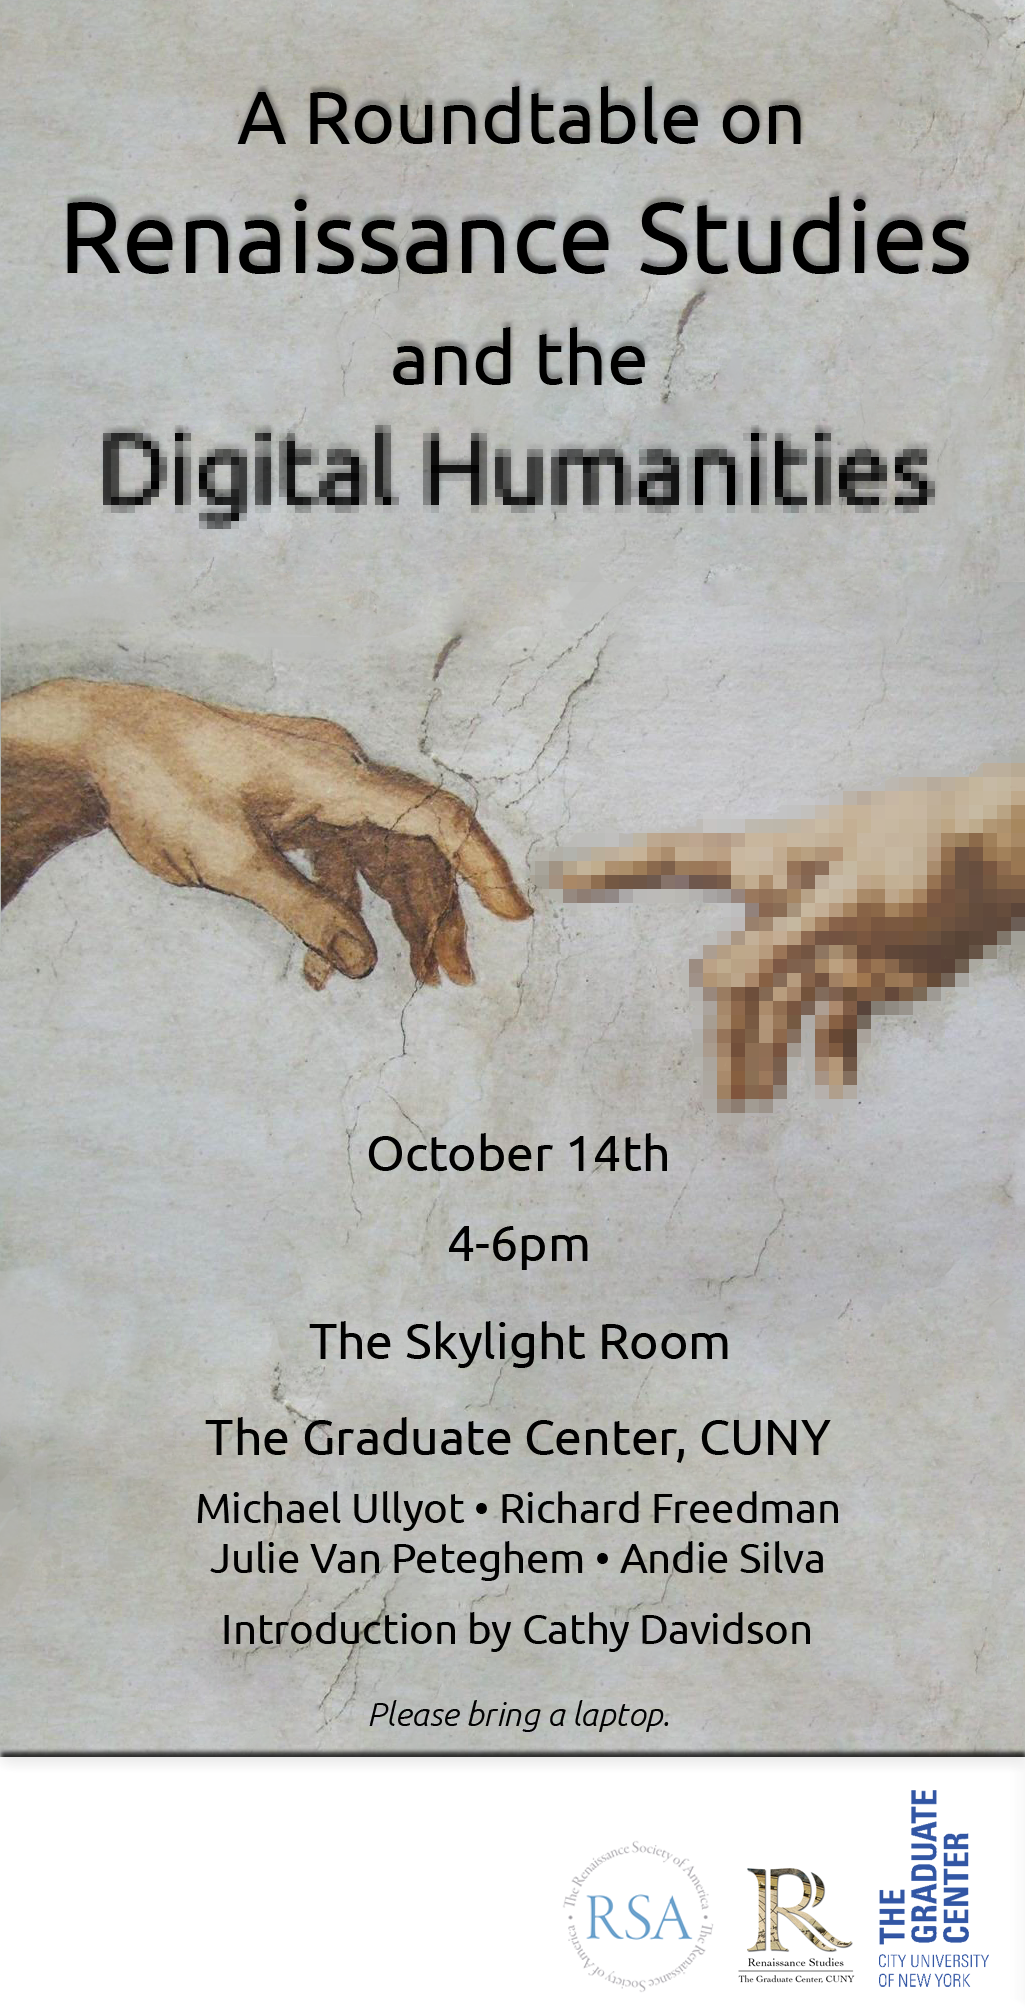 A Roundtable on Renaissance Studies and the Digital Humanities